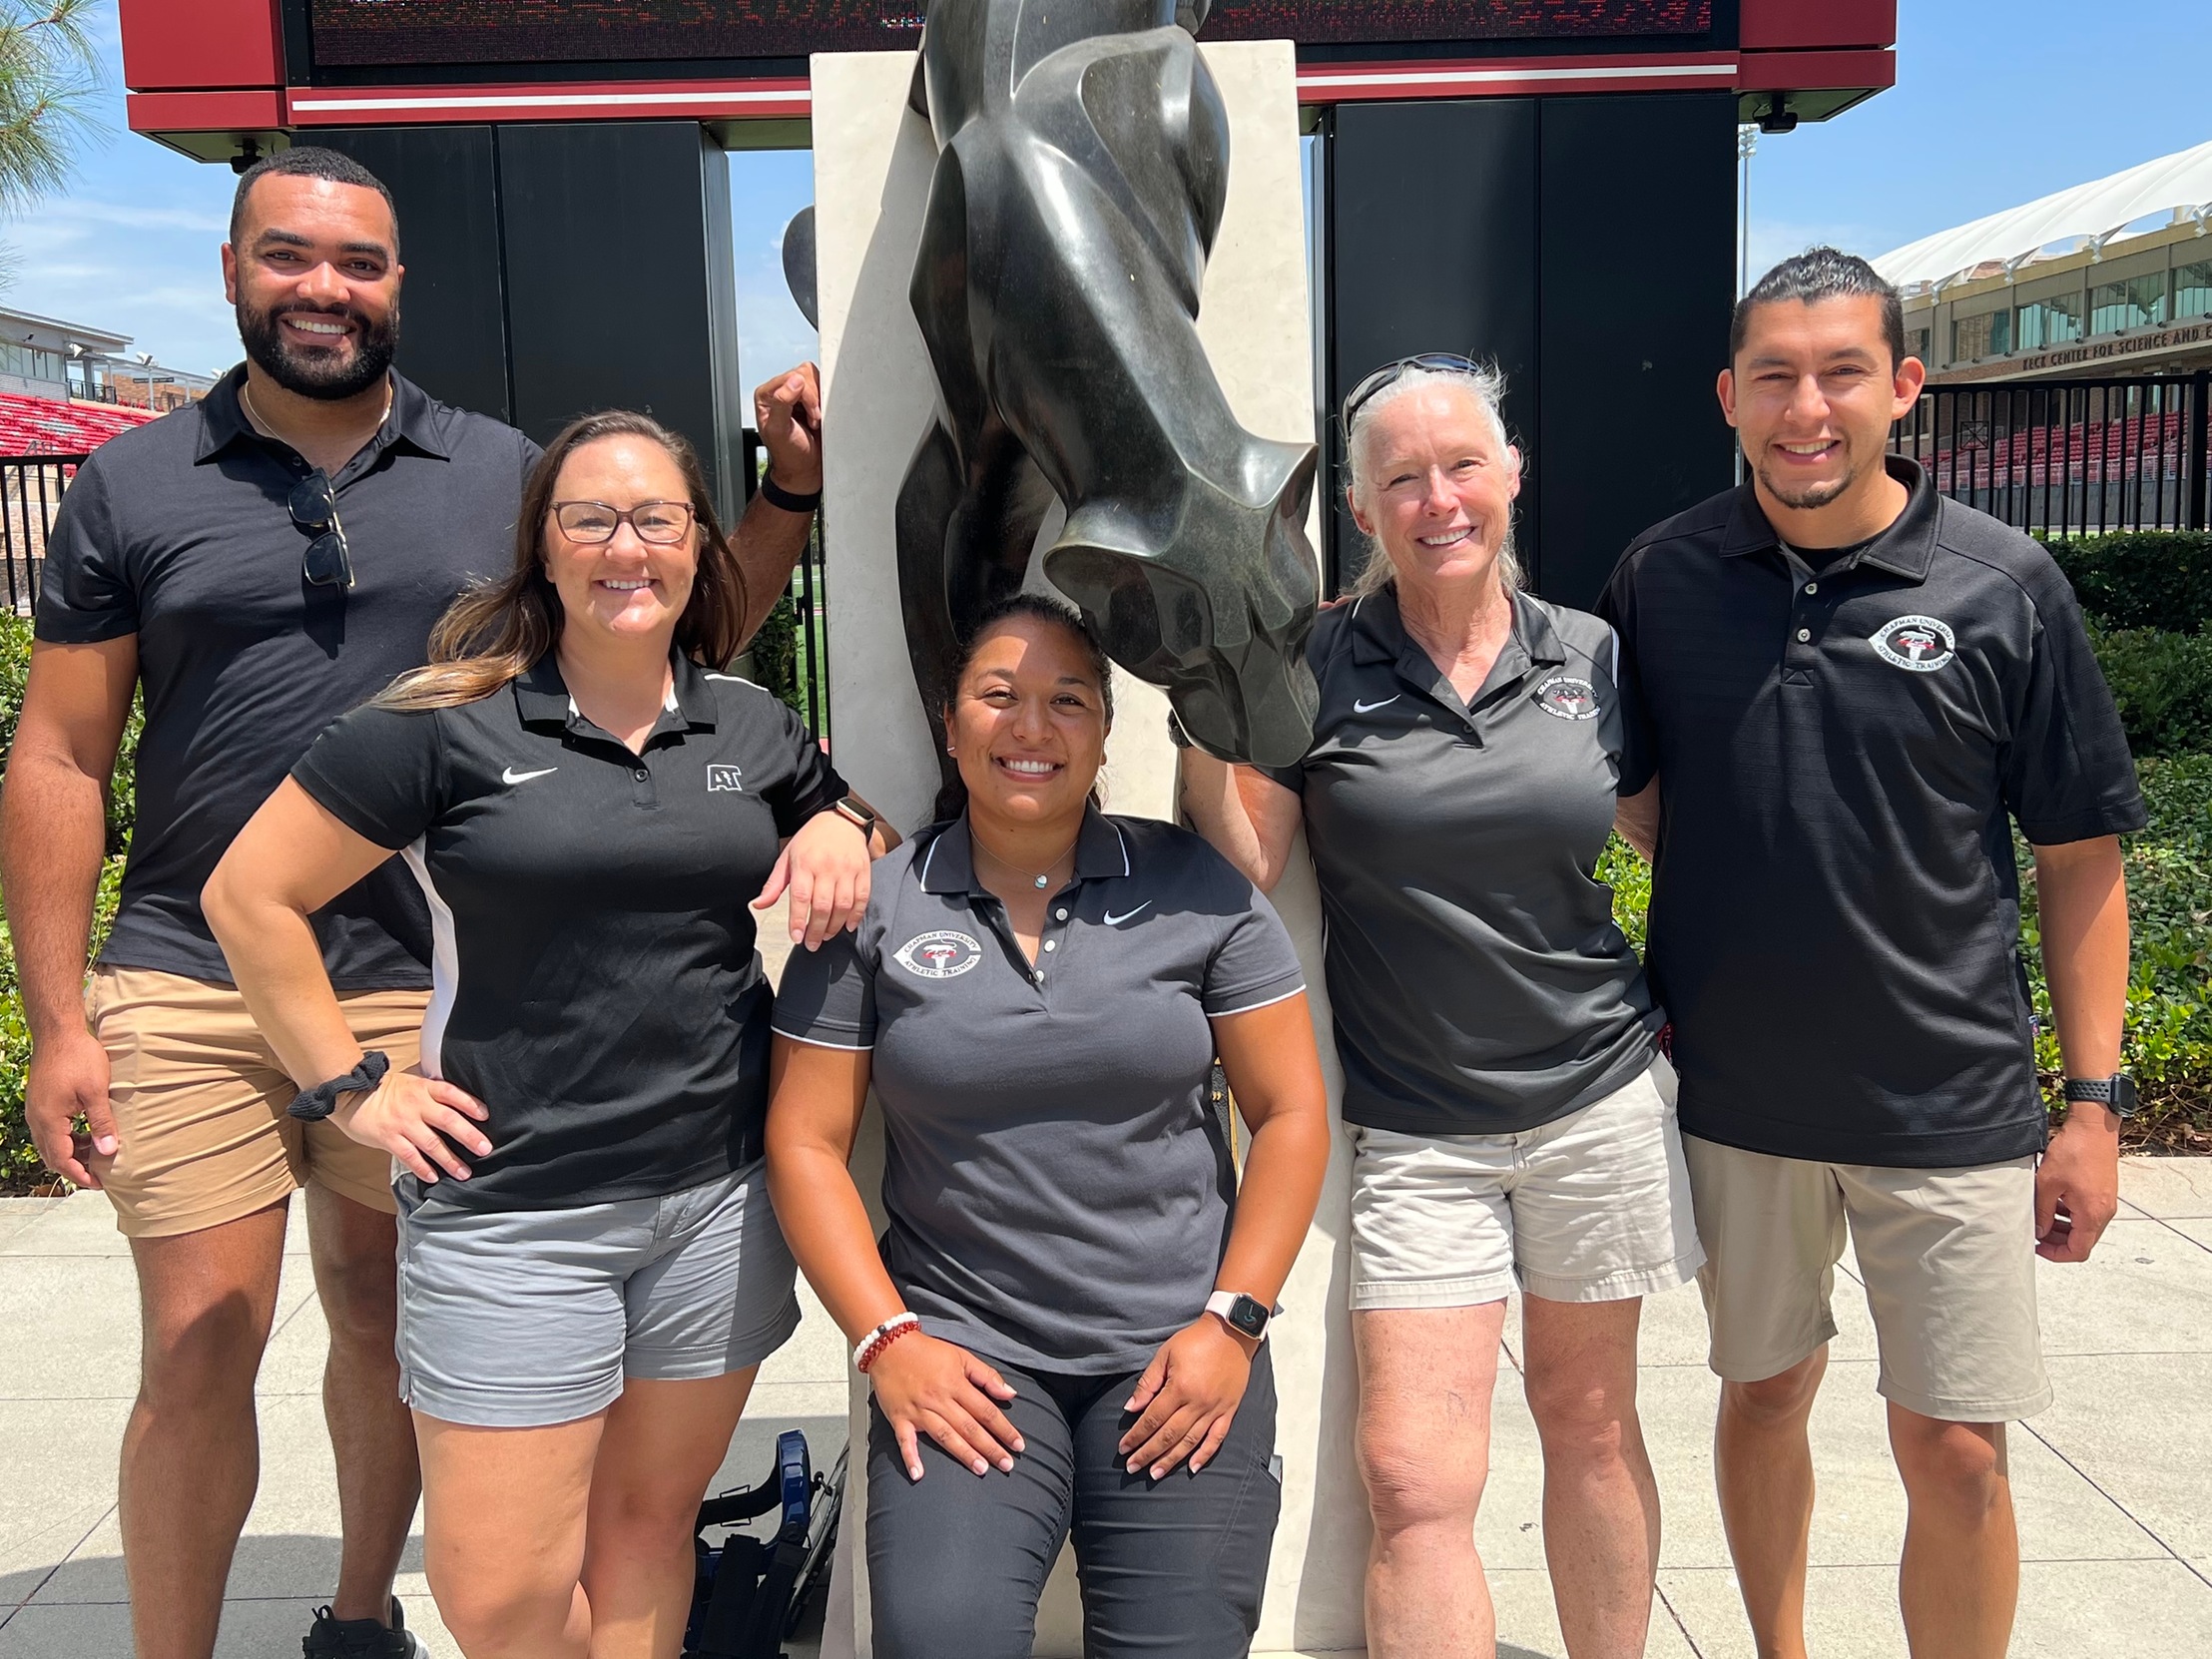 The five athletic trainers in front of the panther statue.